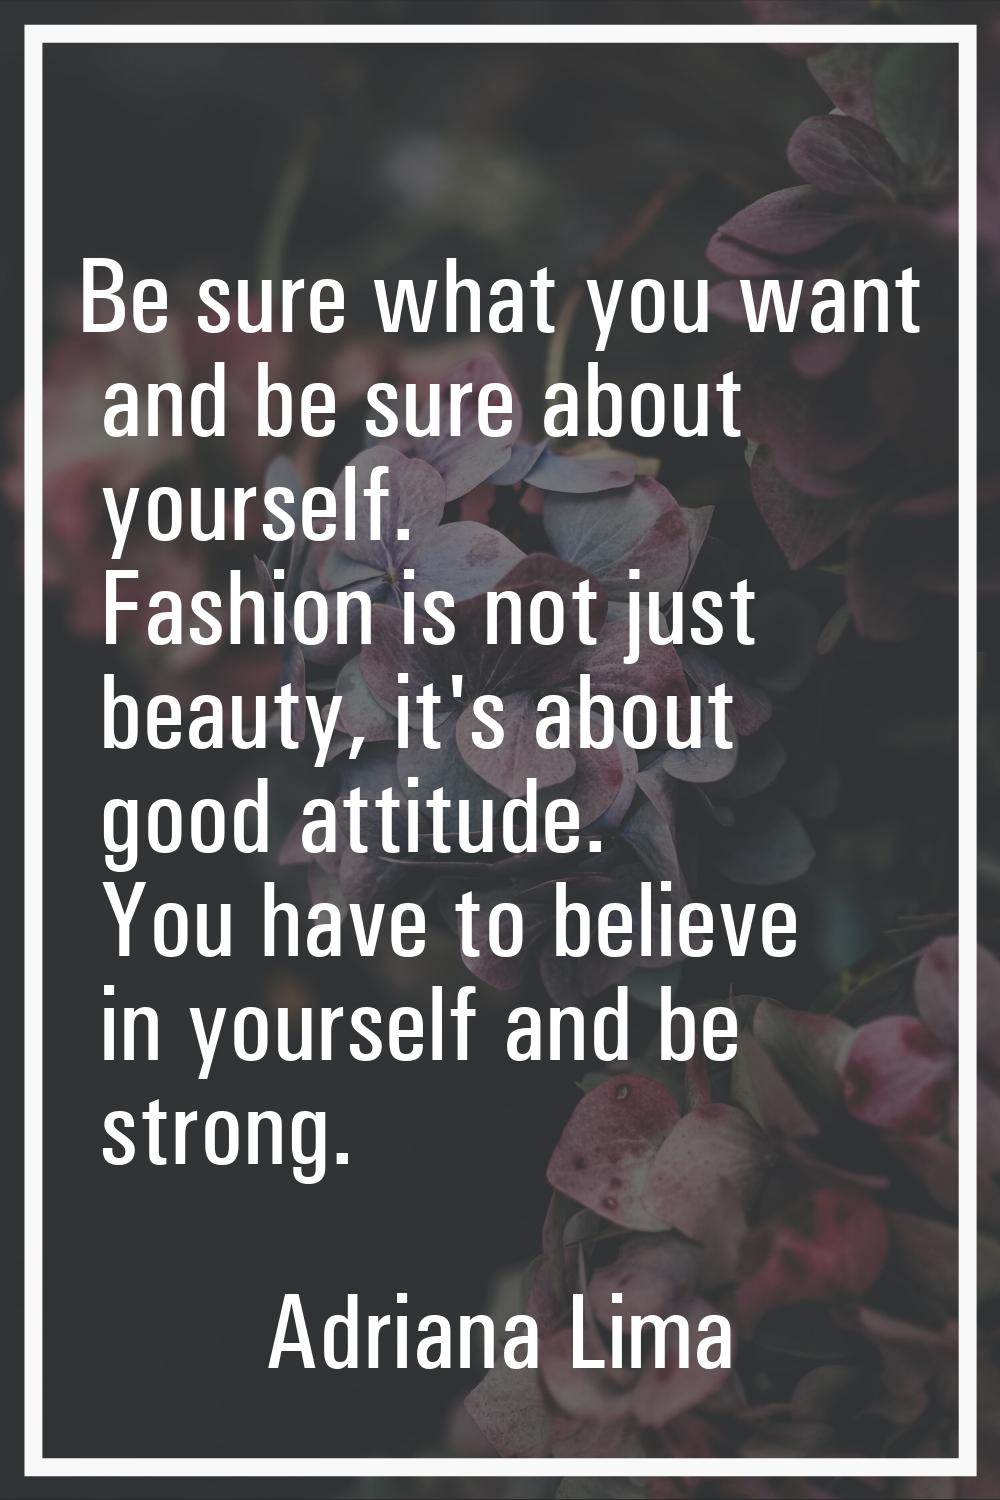 Be sure what you want and be sure about yourself. Fashion is not just beauty, it's about good attit